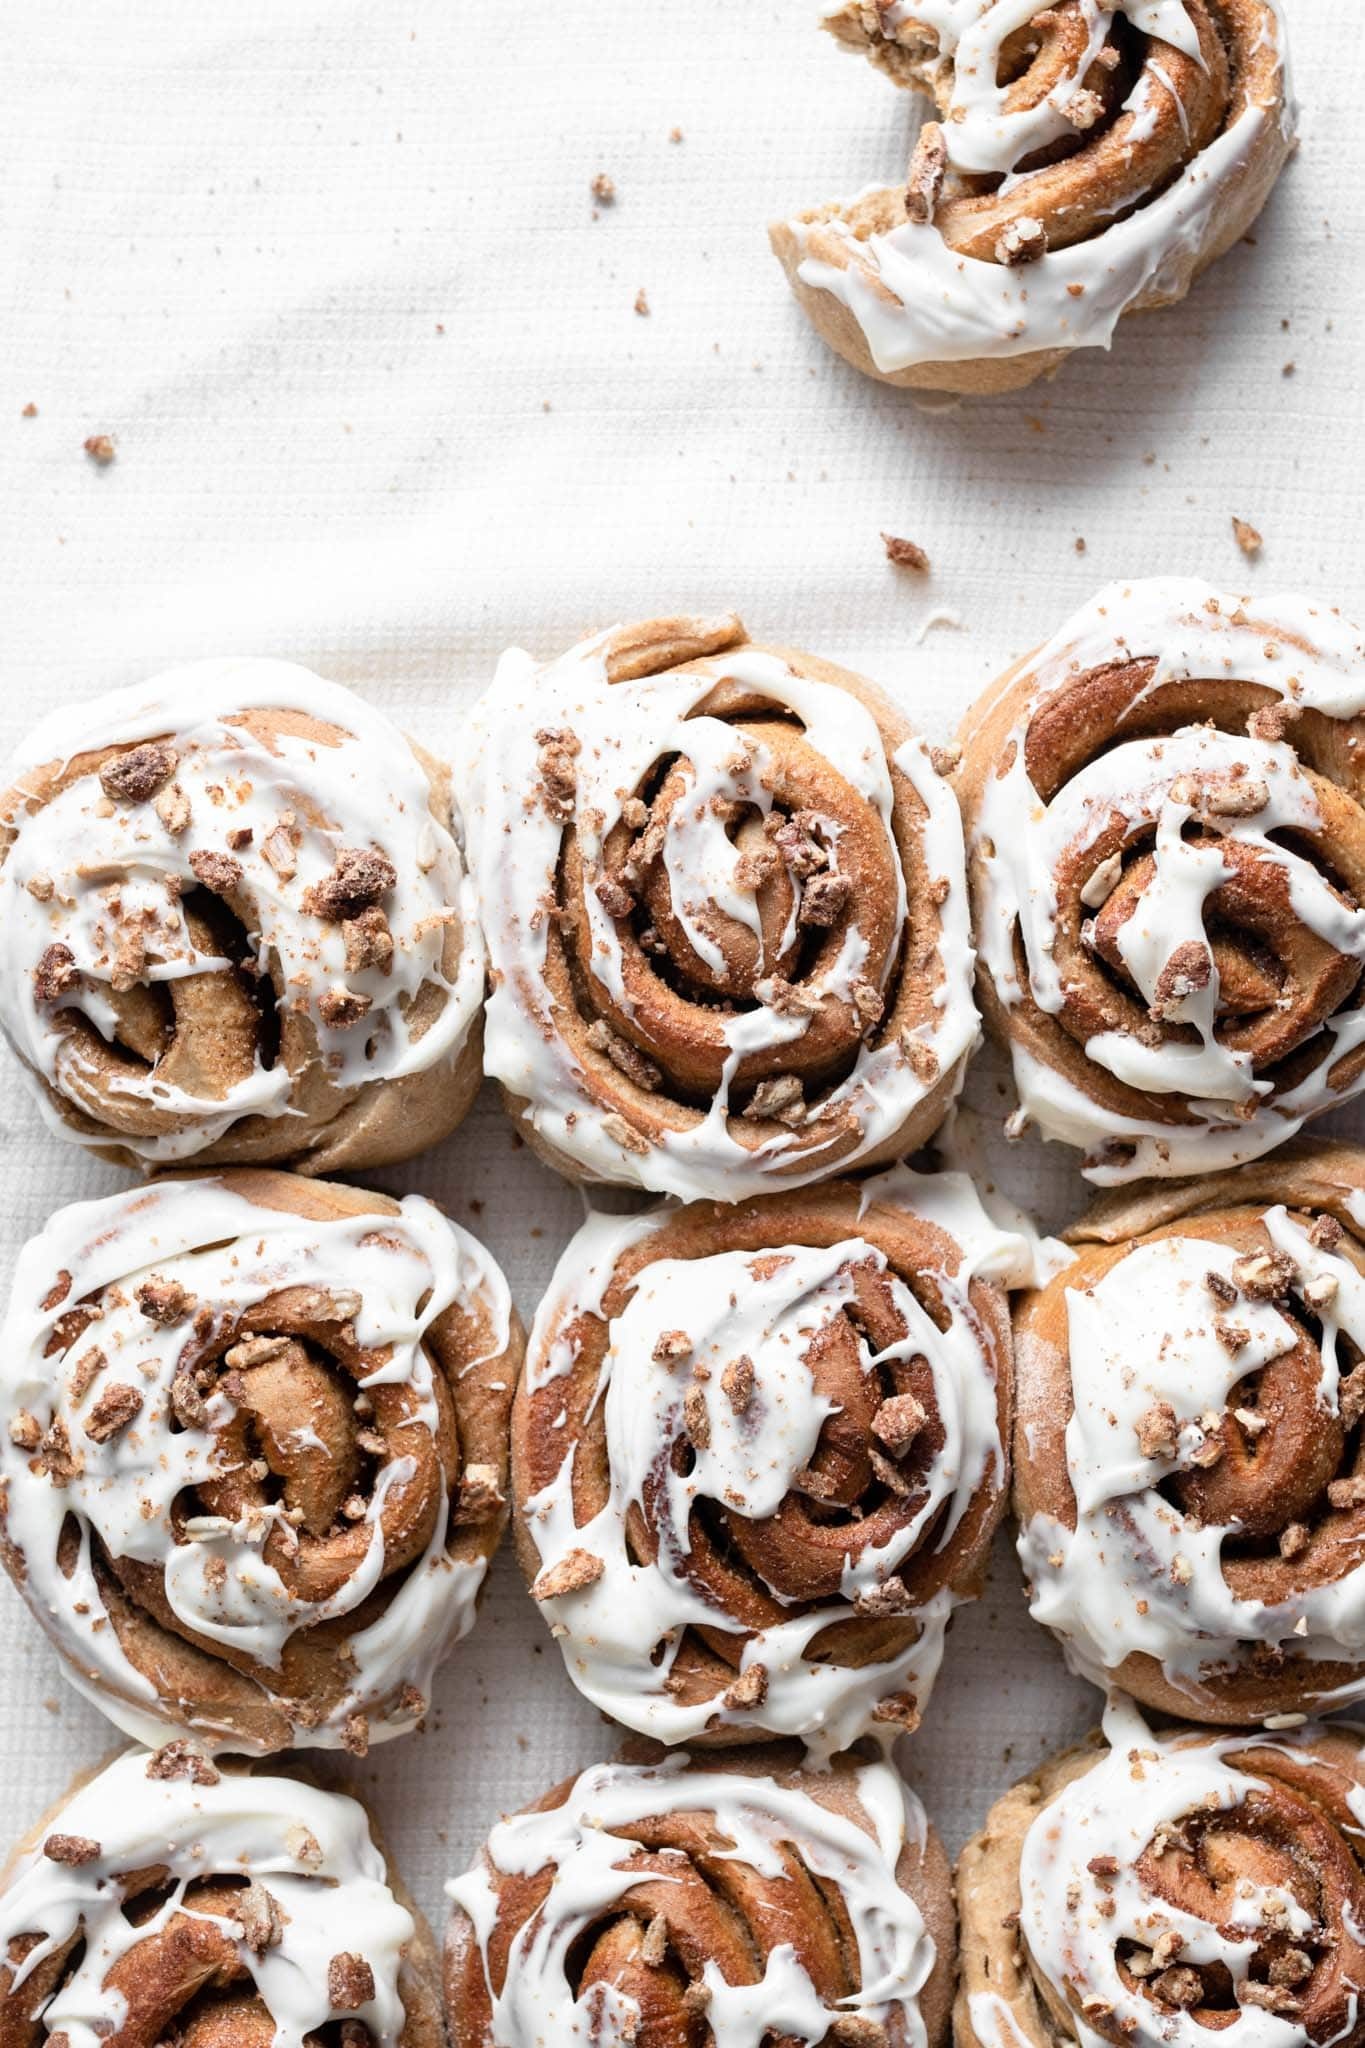 Cinnamon roll: A sweet pastry made from a yeast dough, Ingredients. 1370x2050 HD Background.